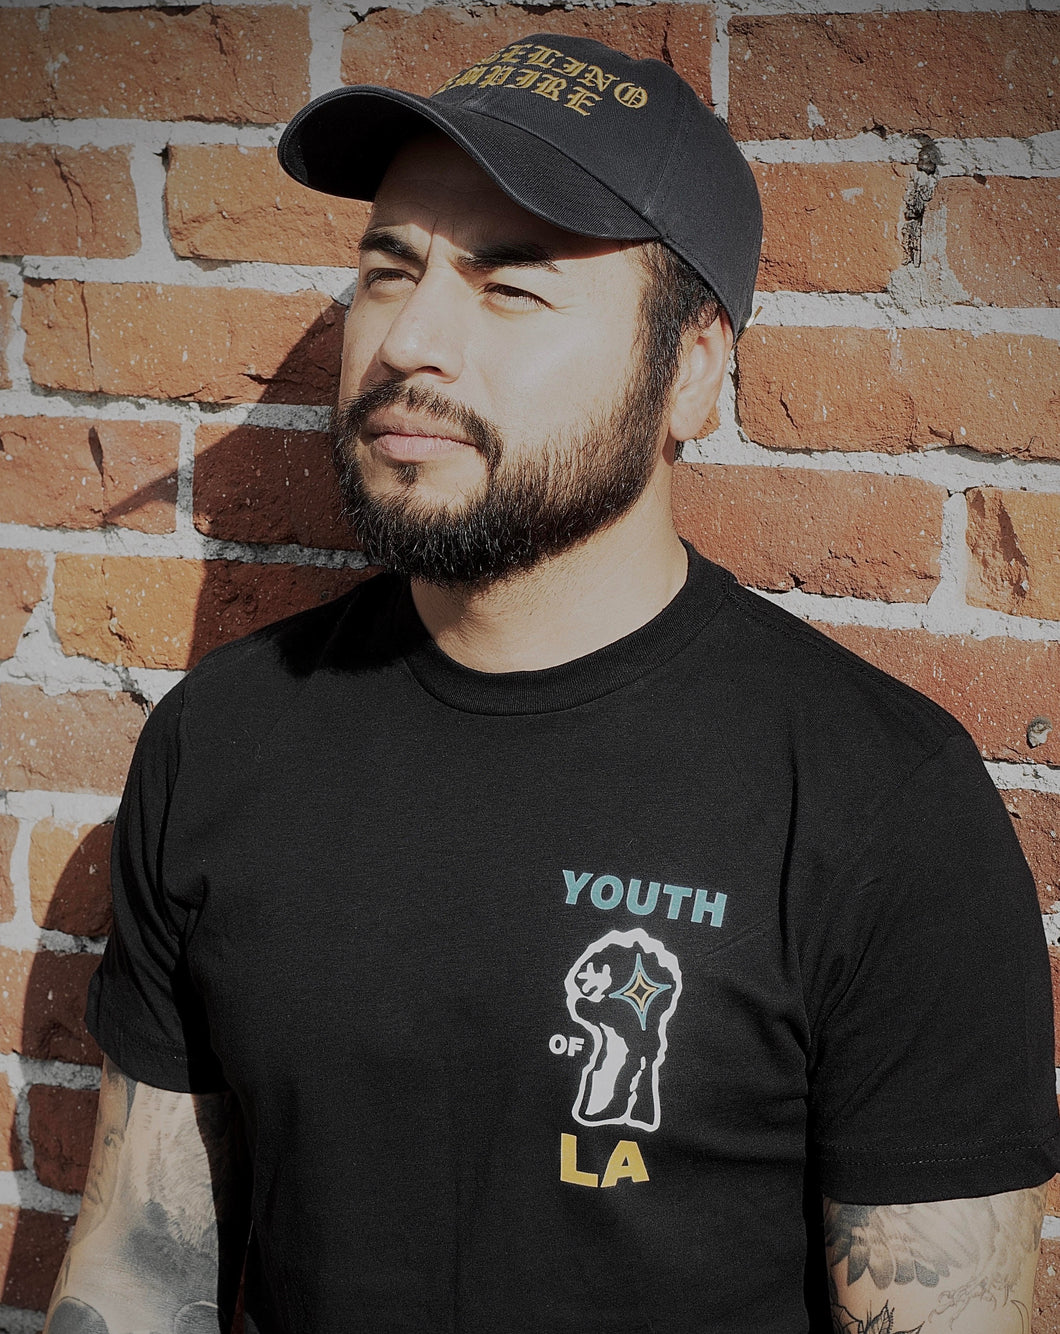 Steamrollers x One Two Threads - Youth of LA Tee